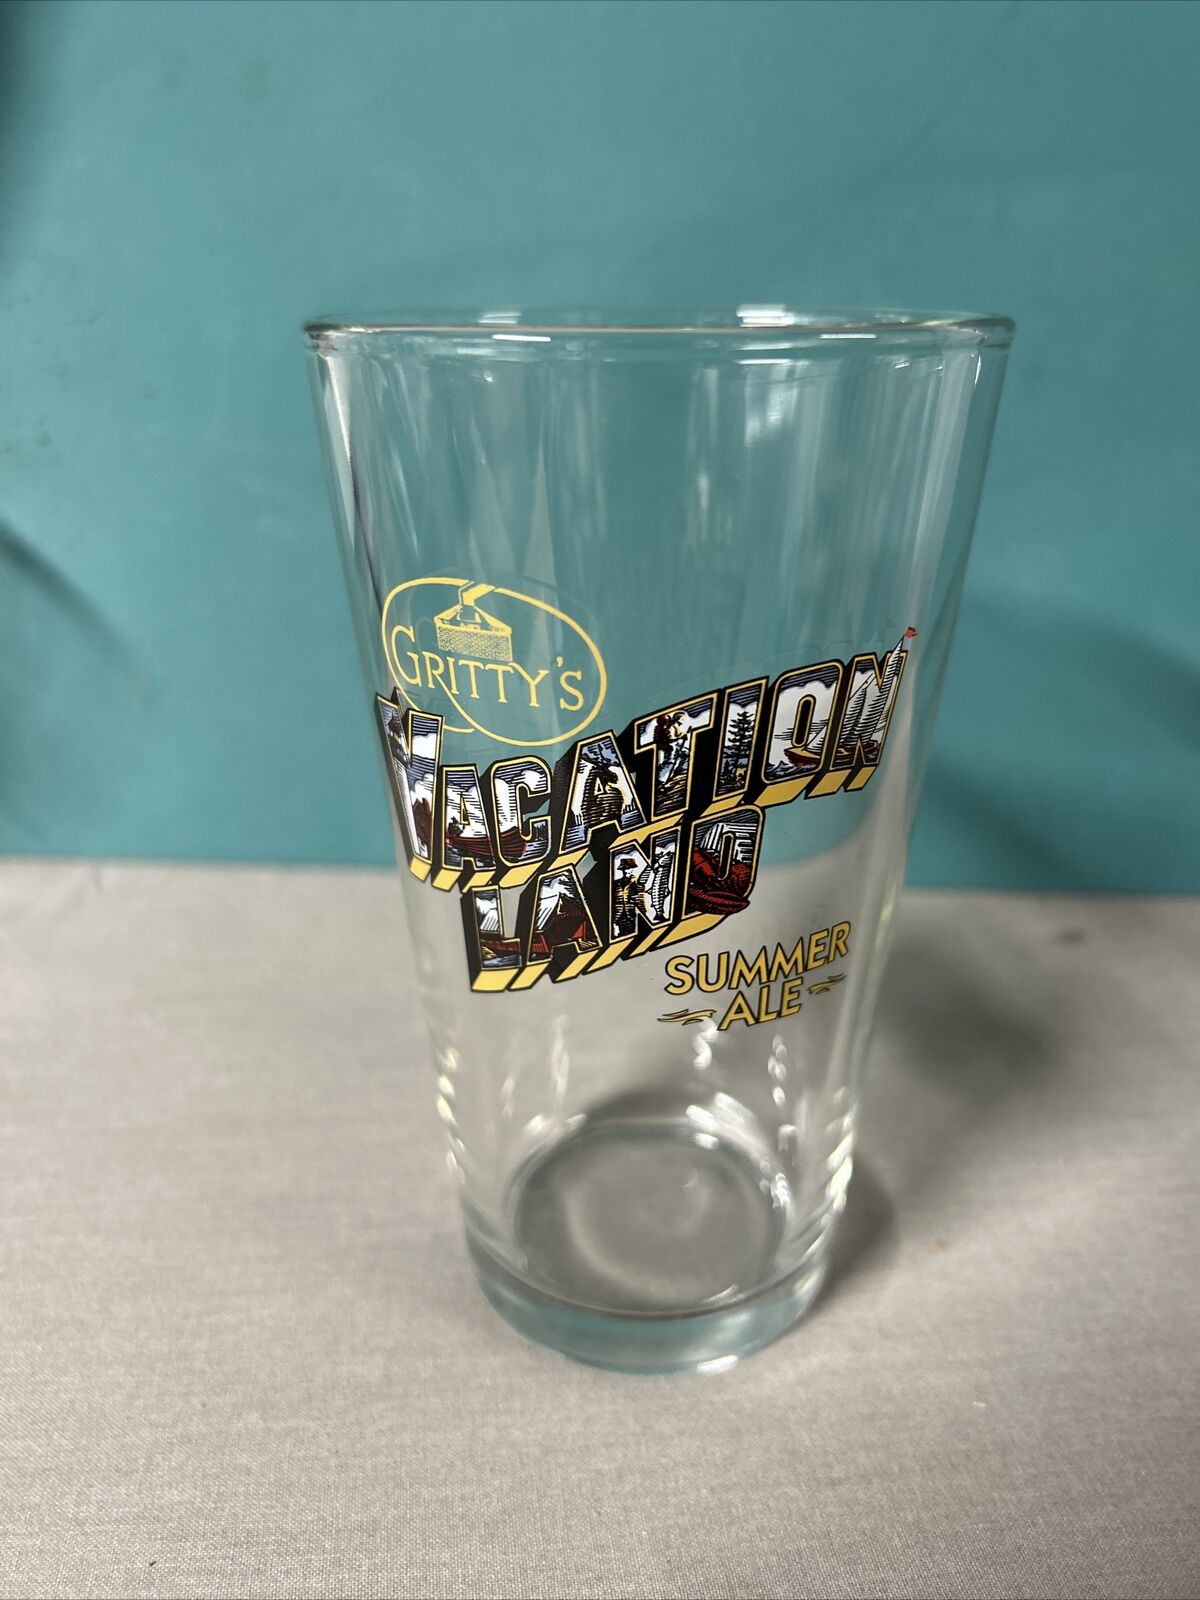 Gritty’s Vacation Land Summer Ale Pint Beer Glass Maine Beer